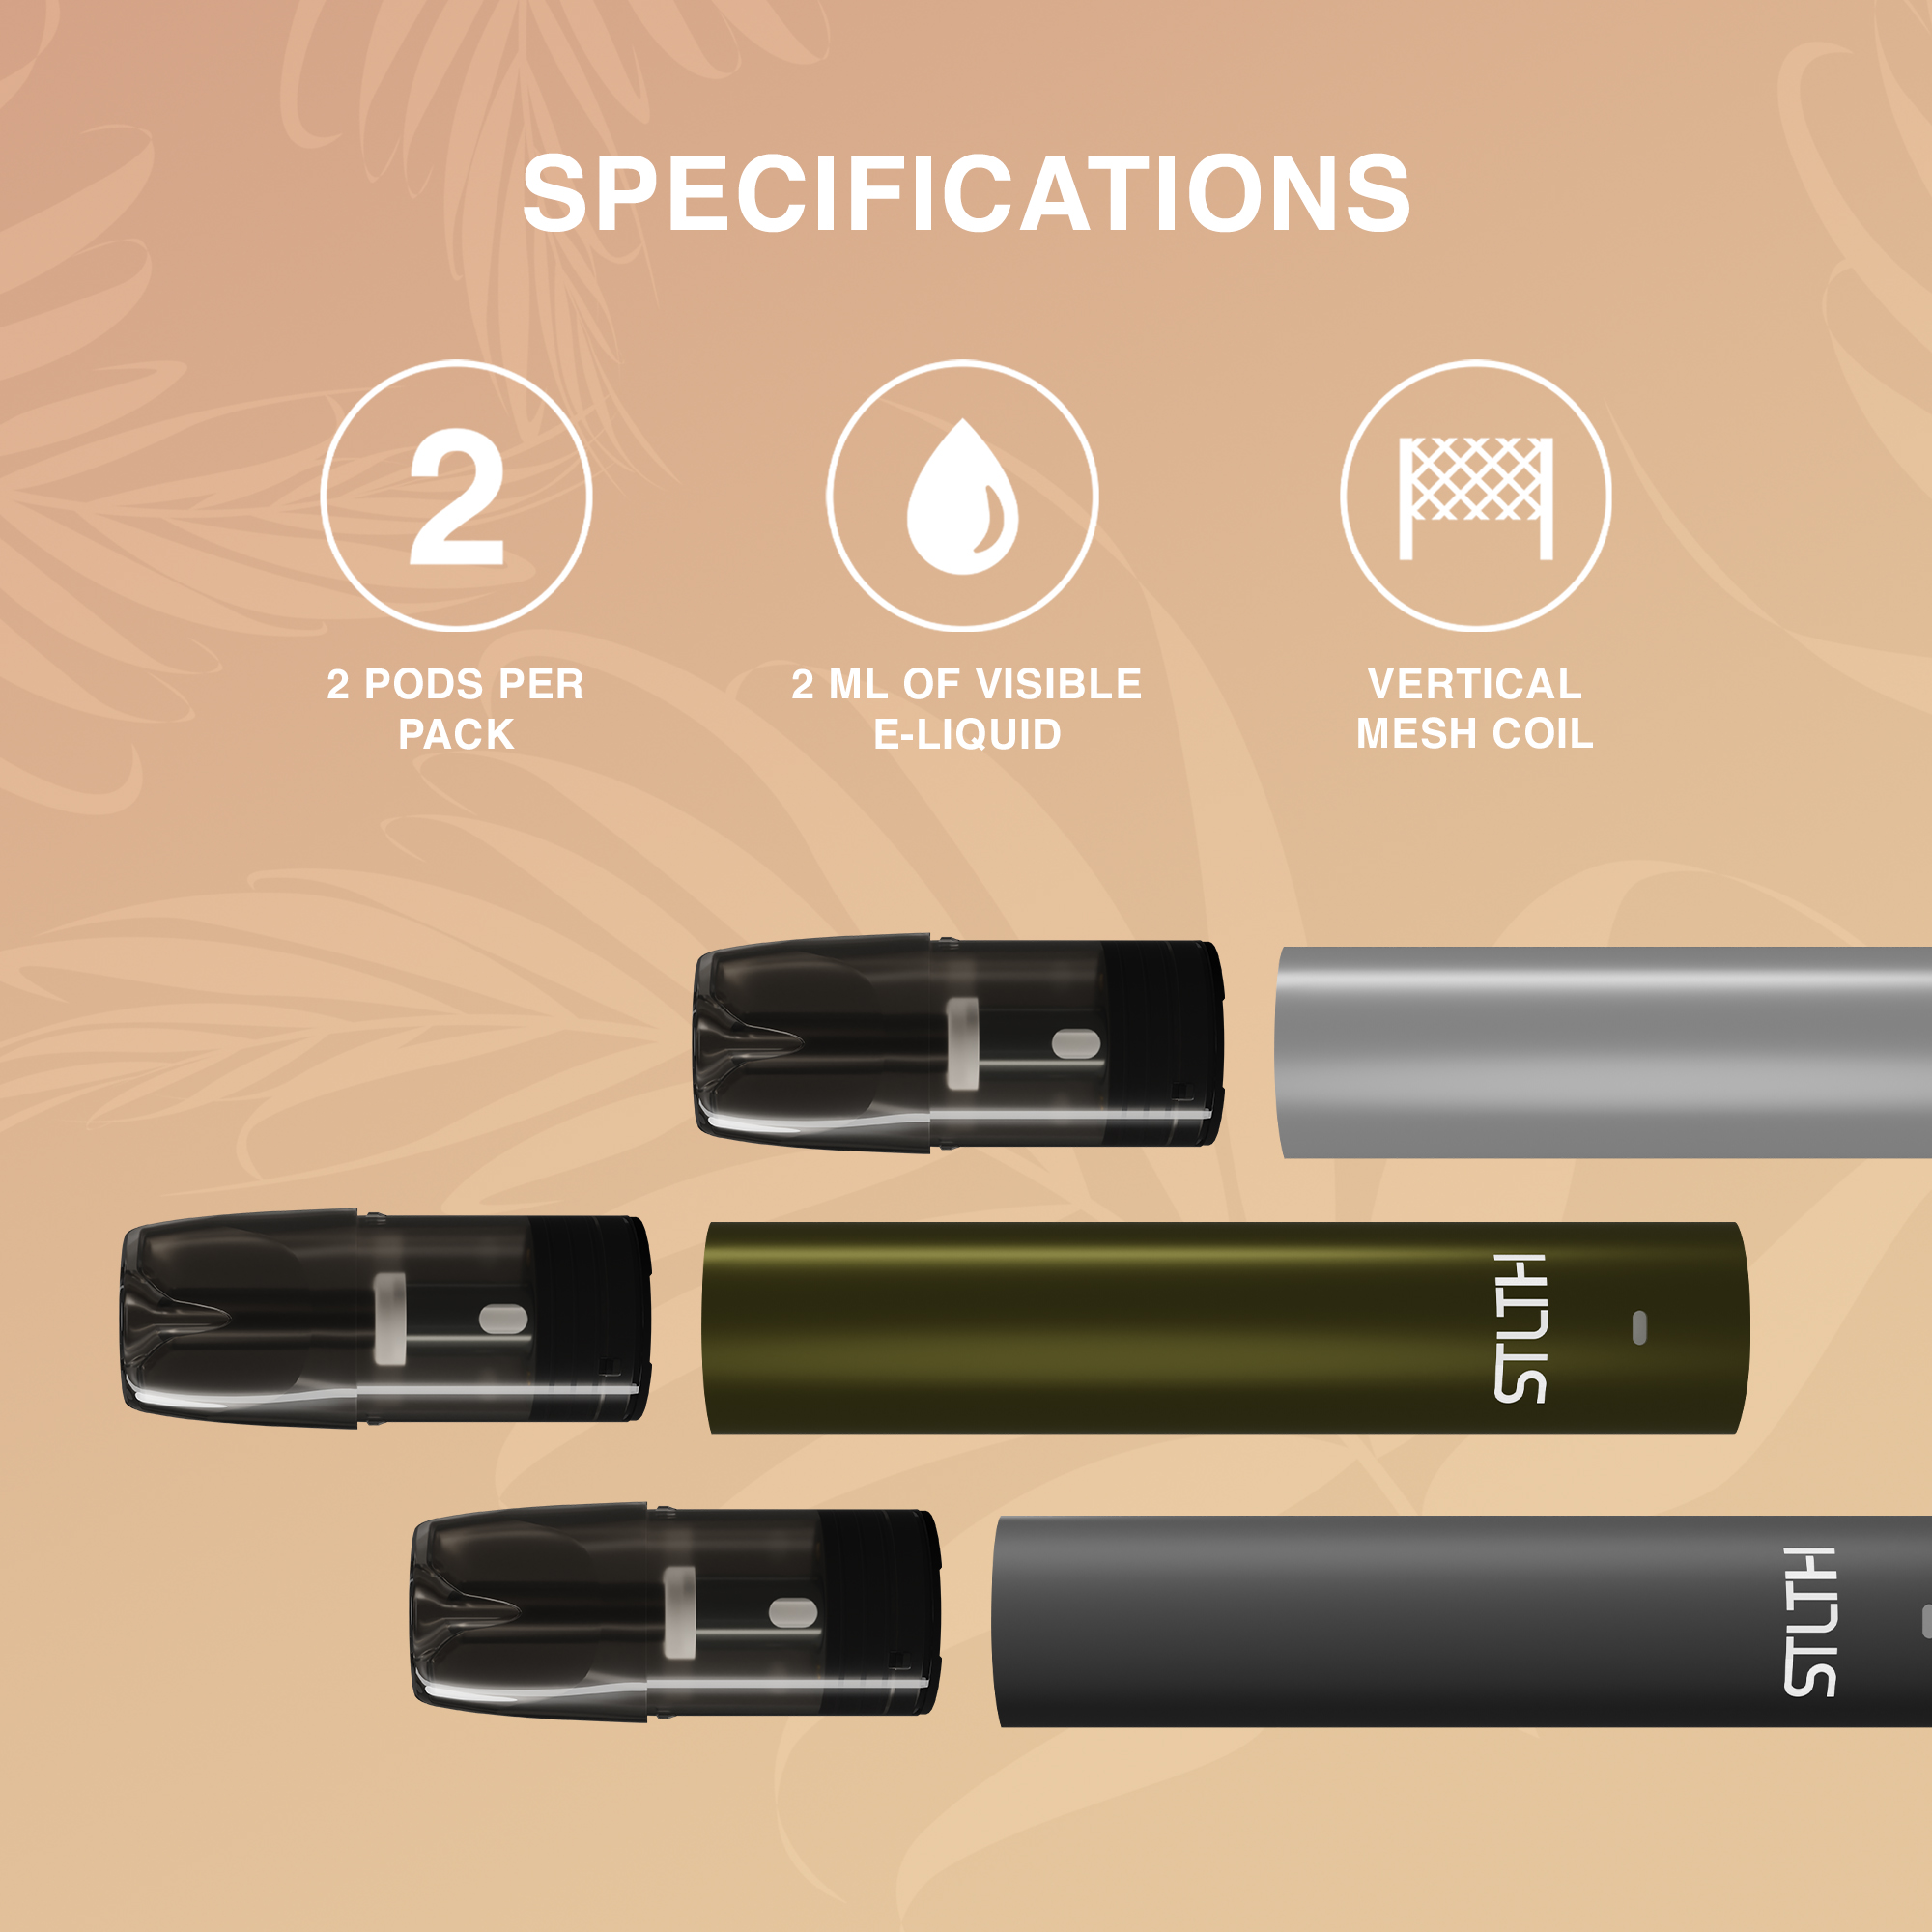 SPECIFICATIONS: 2 PODS PER PACK, 2 ML OF VISIBLE E-LIQUID, VERTICAL MESH COIL